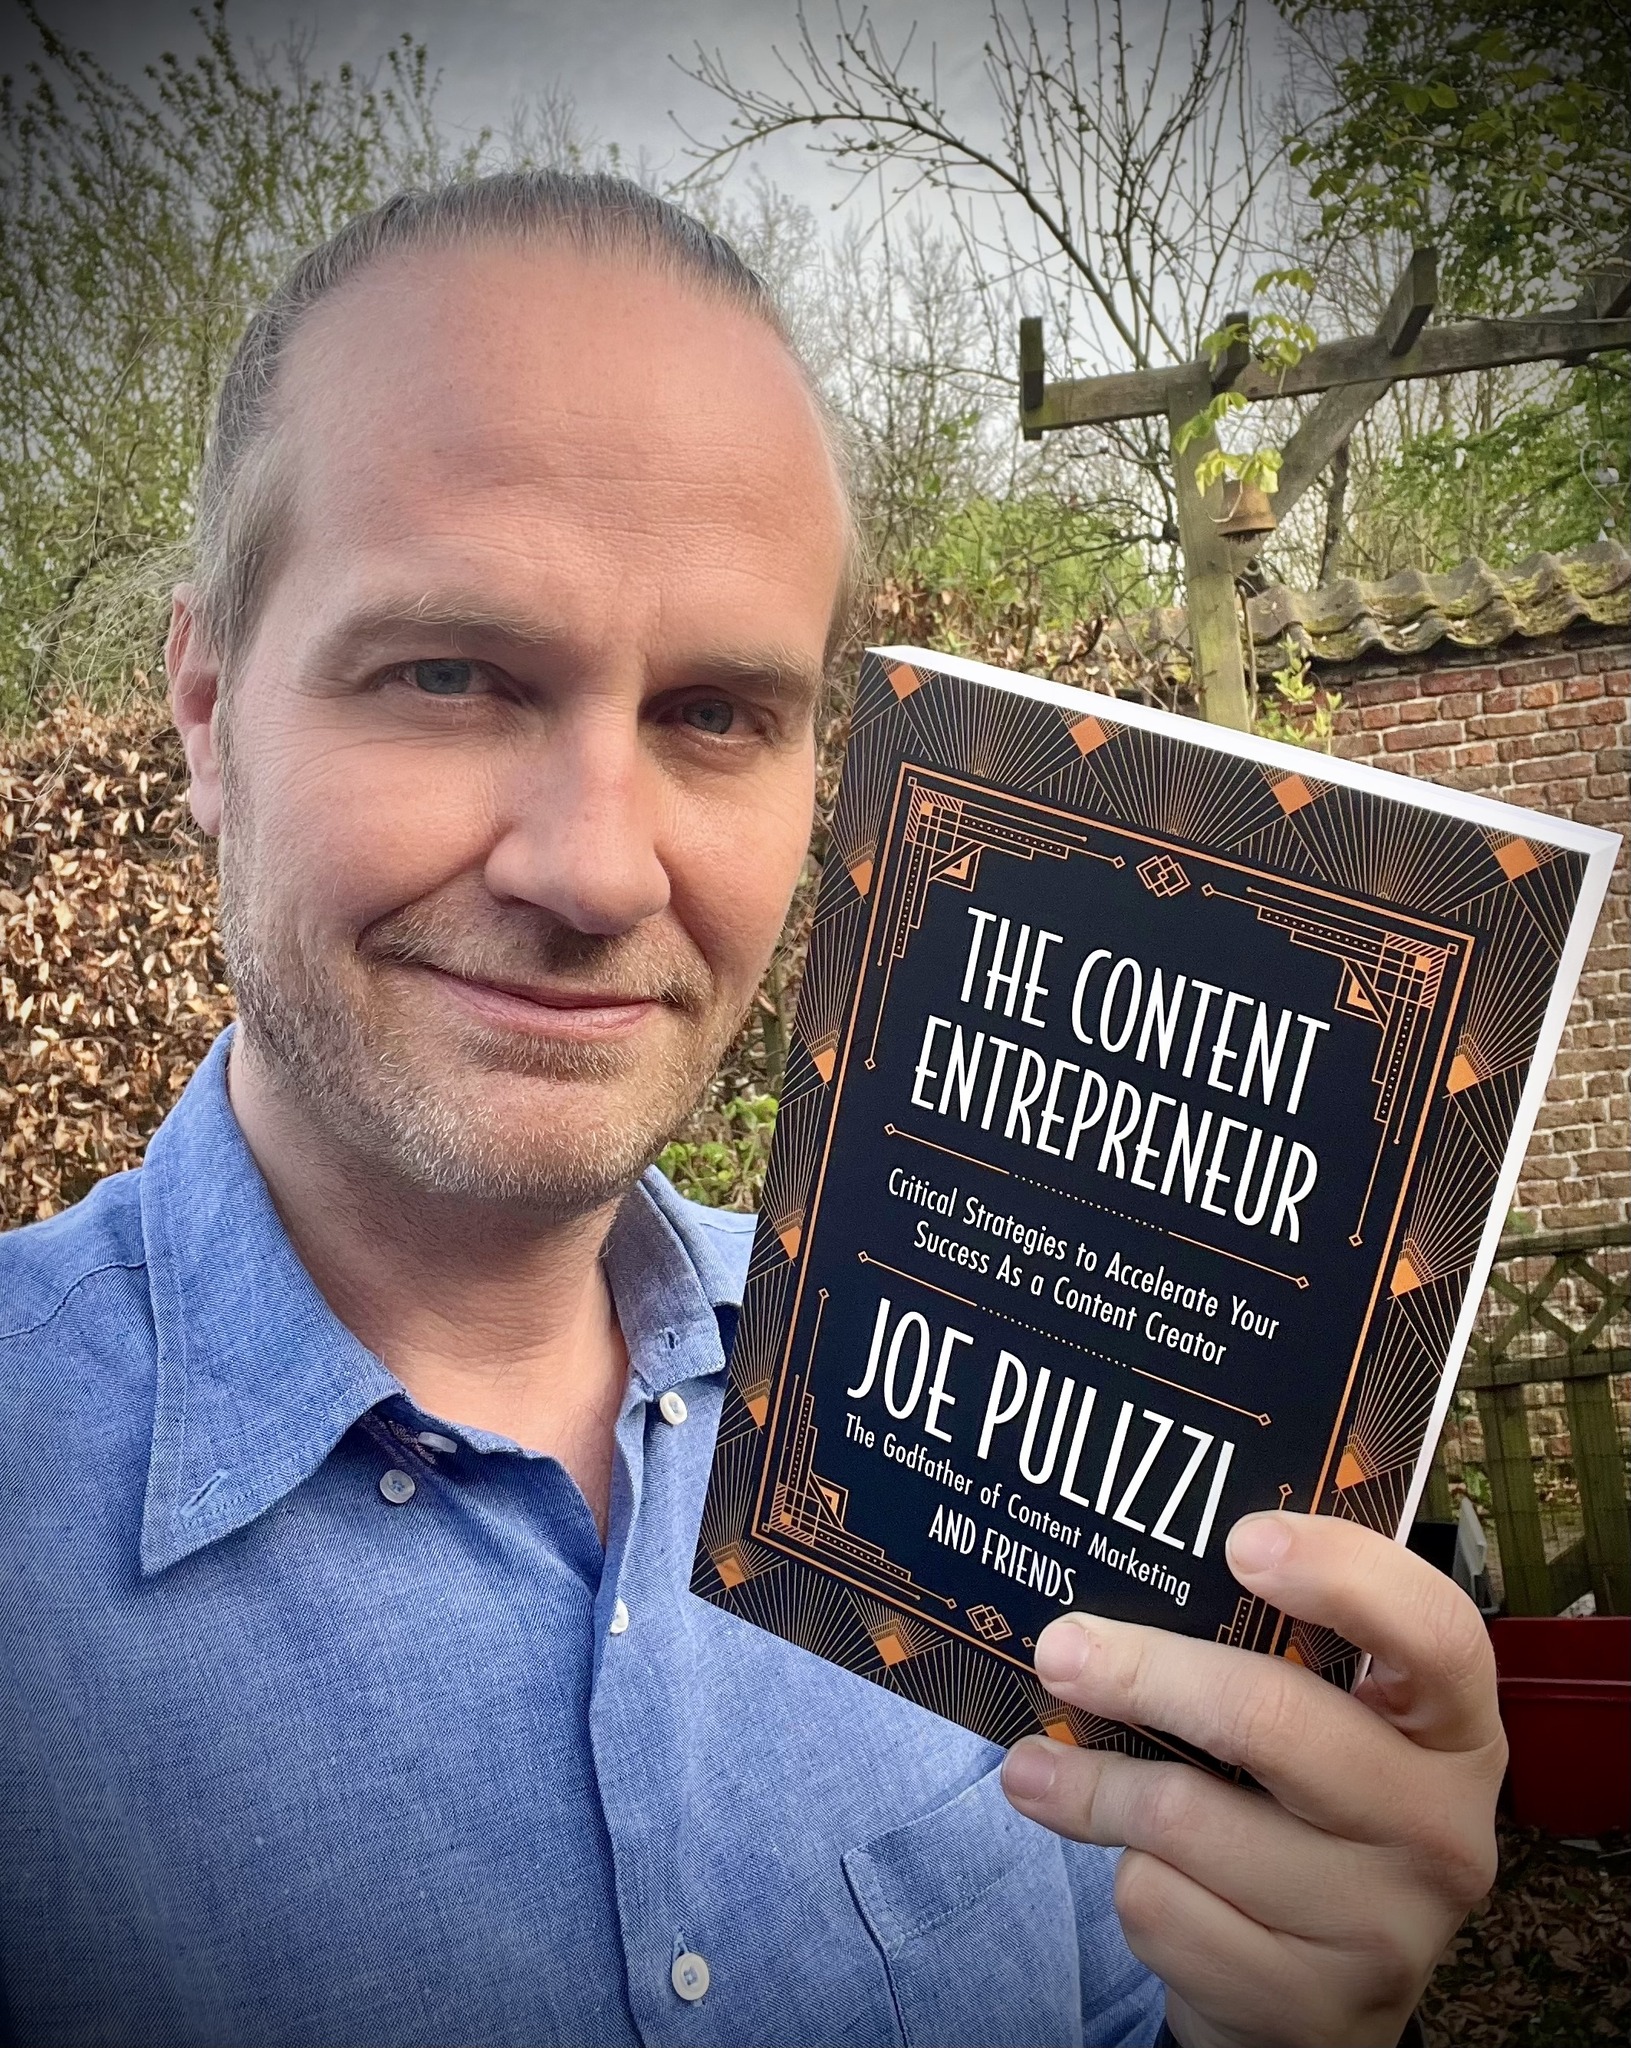 How to Use the Metaverse as a Marketing Platform: My Chapter in "The Content Entrepreneur" – by Joe Pulizzi and Friends